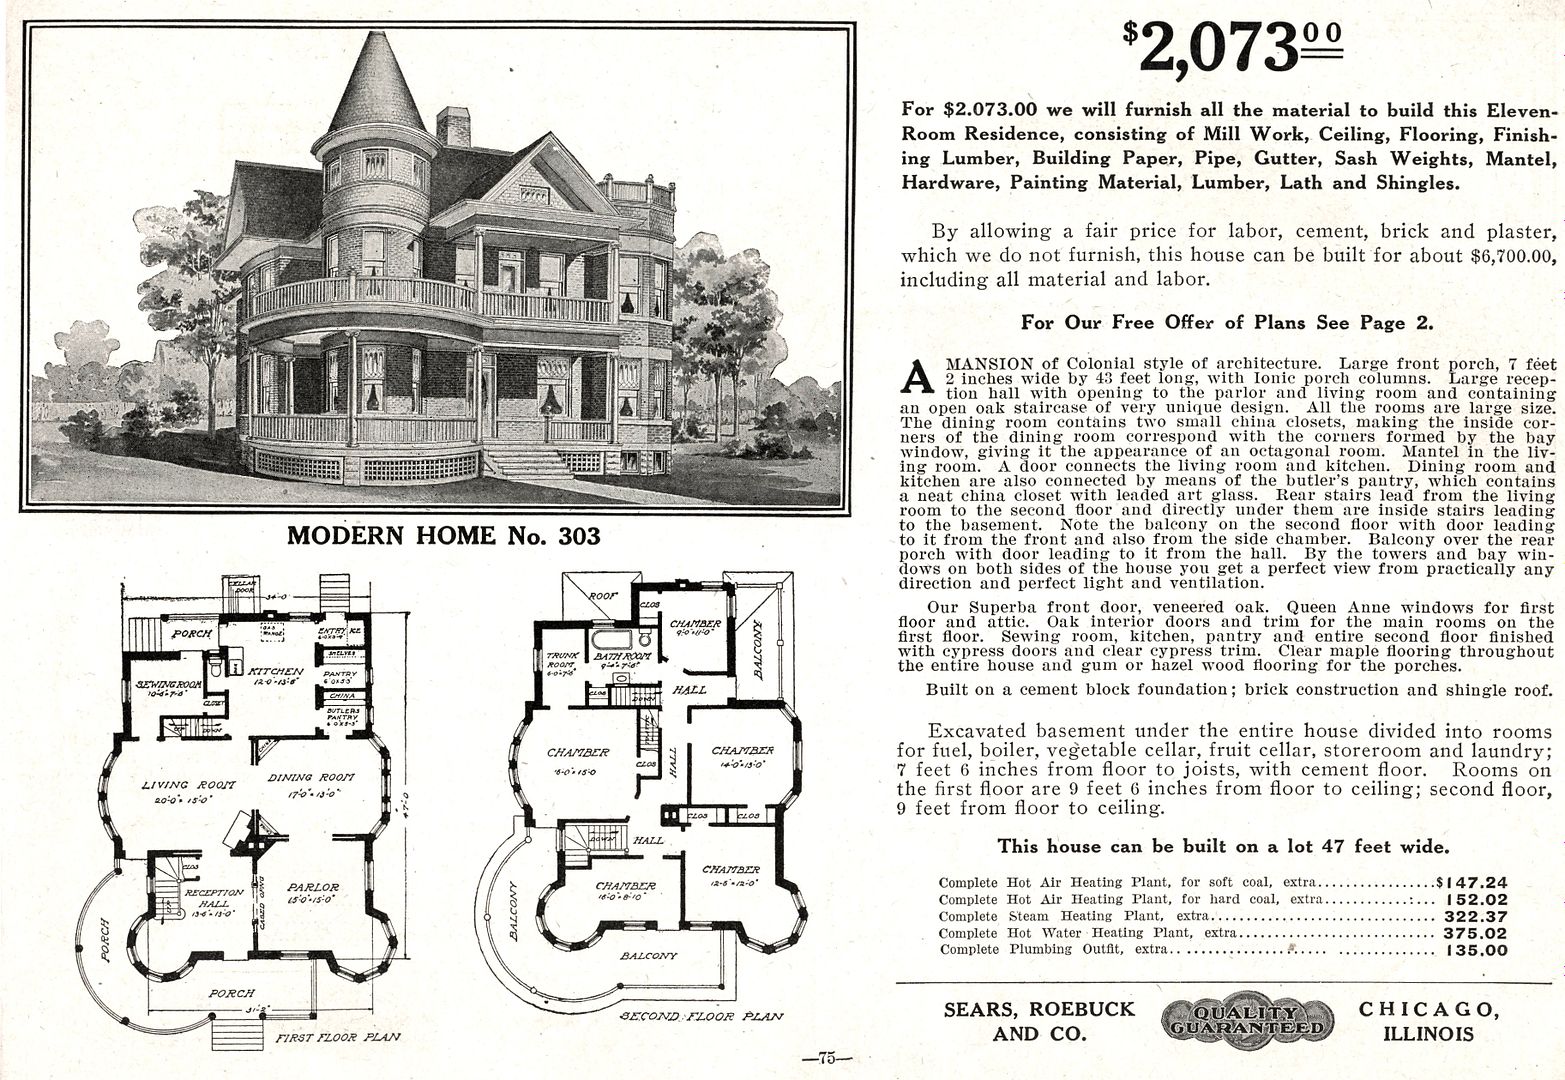 Modern Home #303 was offered only in the very rare 1910 Sears Modern Homes catalog. 